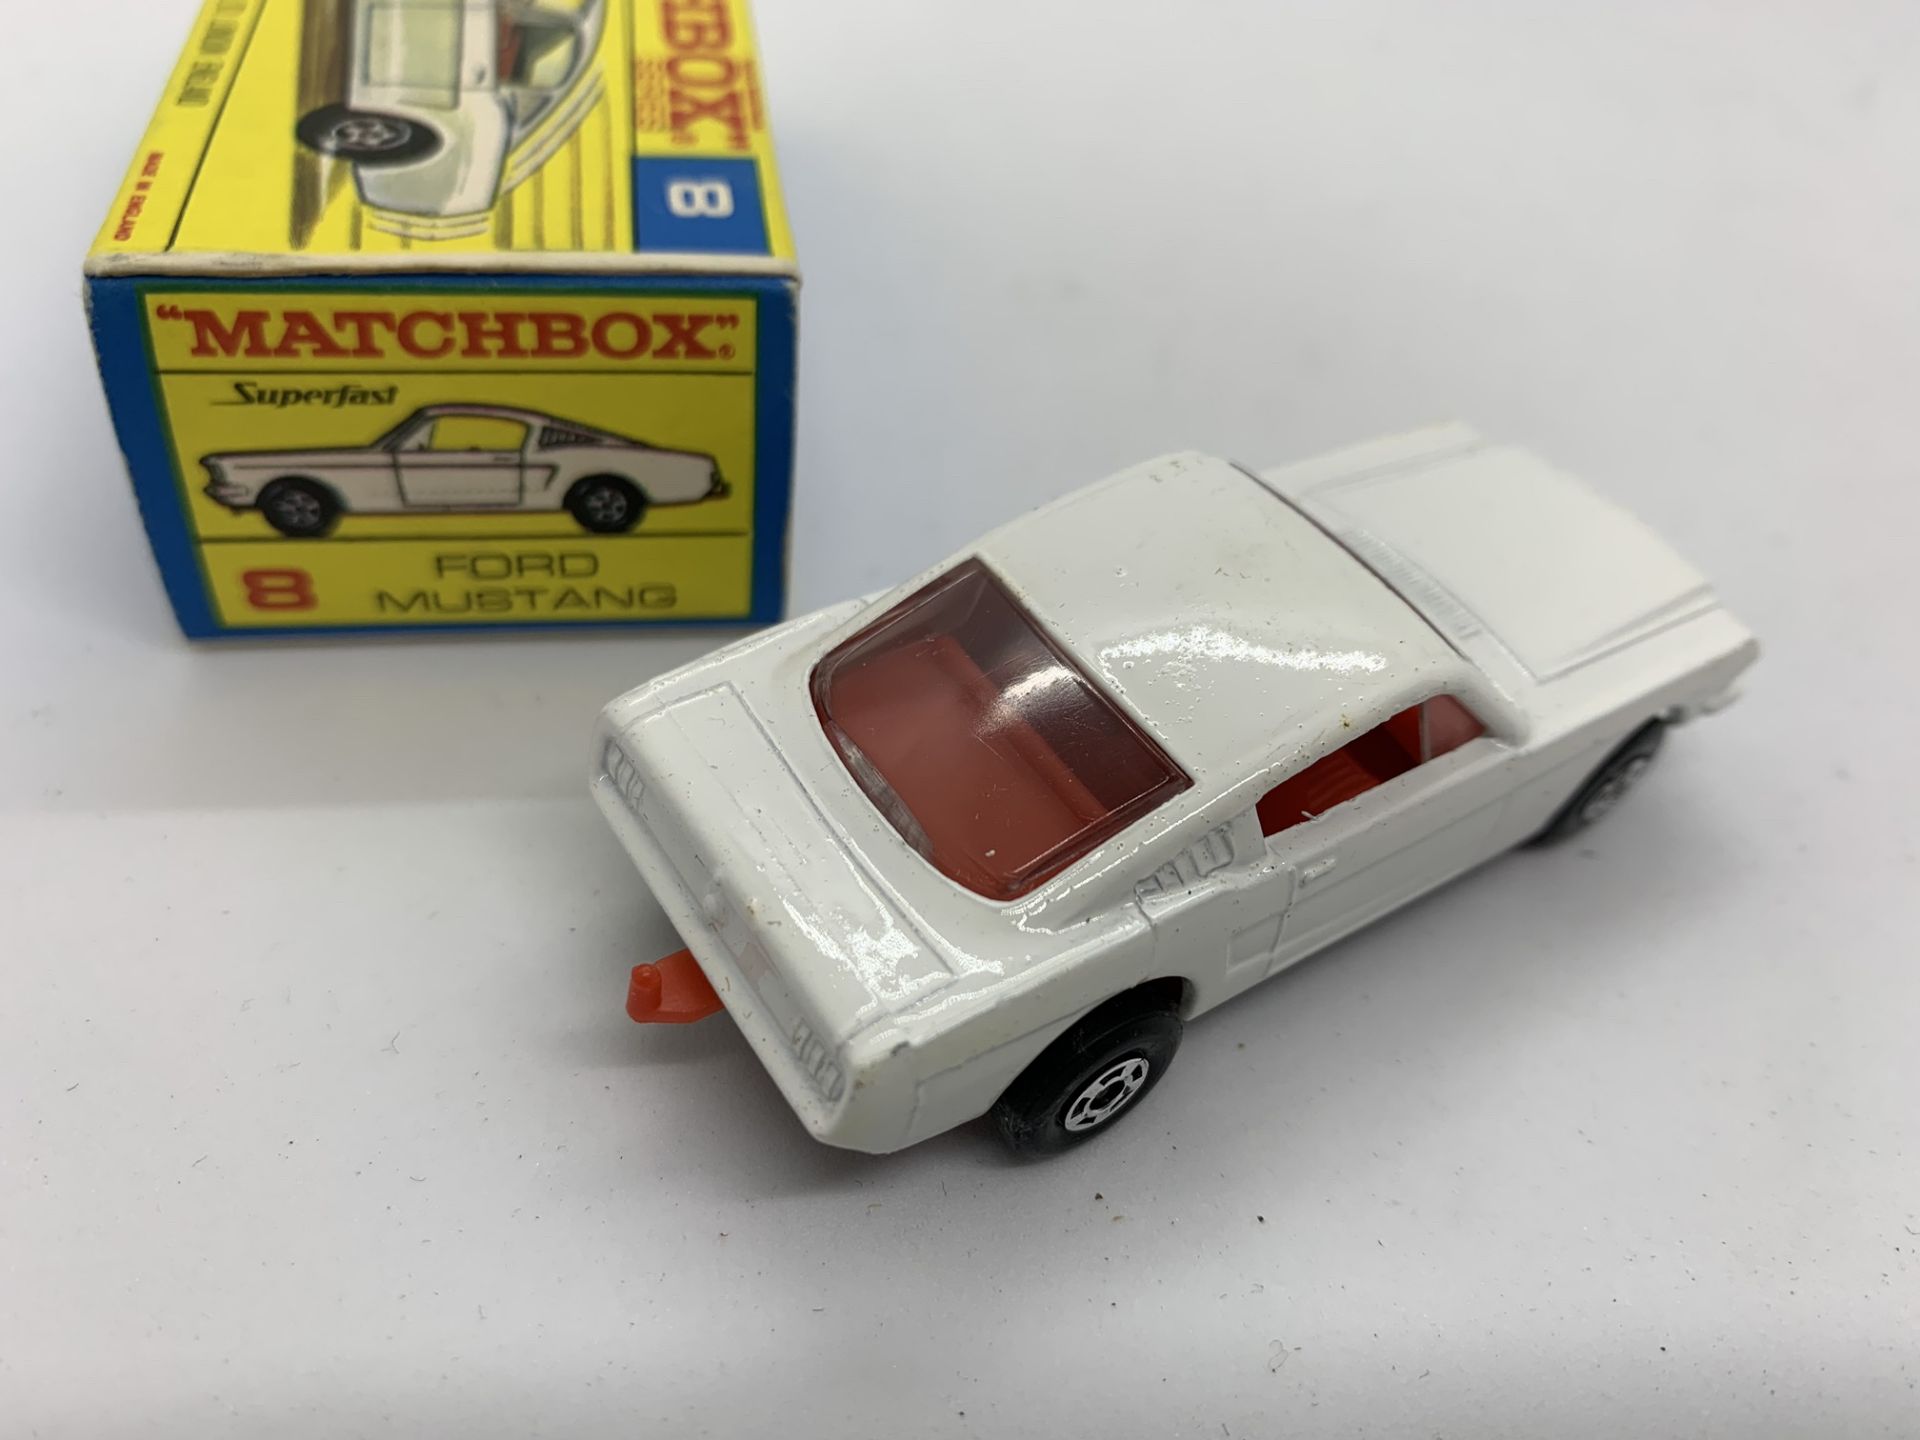 MATCHBOX FORD MUSTANG NO 8 WITH ORIGINAL BOX - NO RESERVE - Image 4 of 6